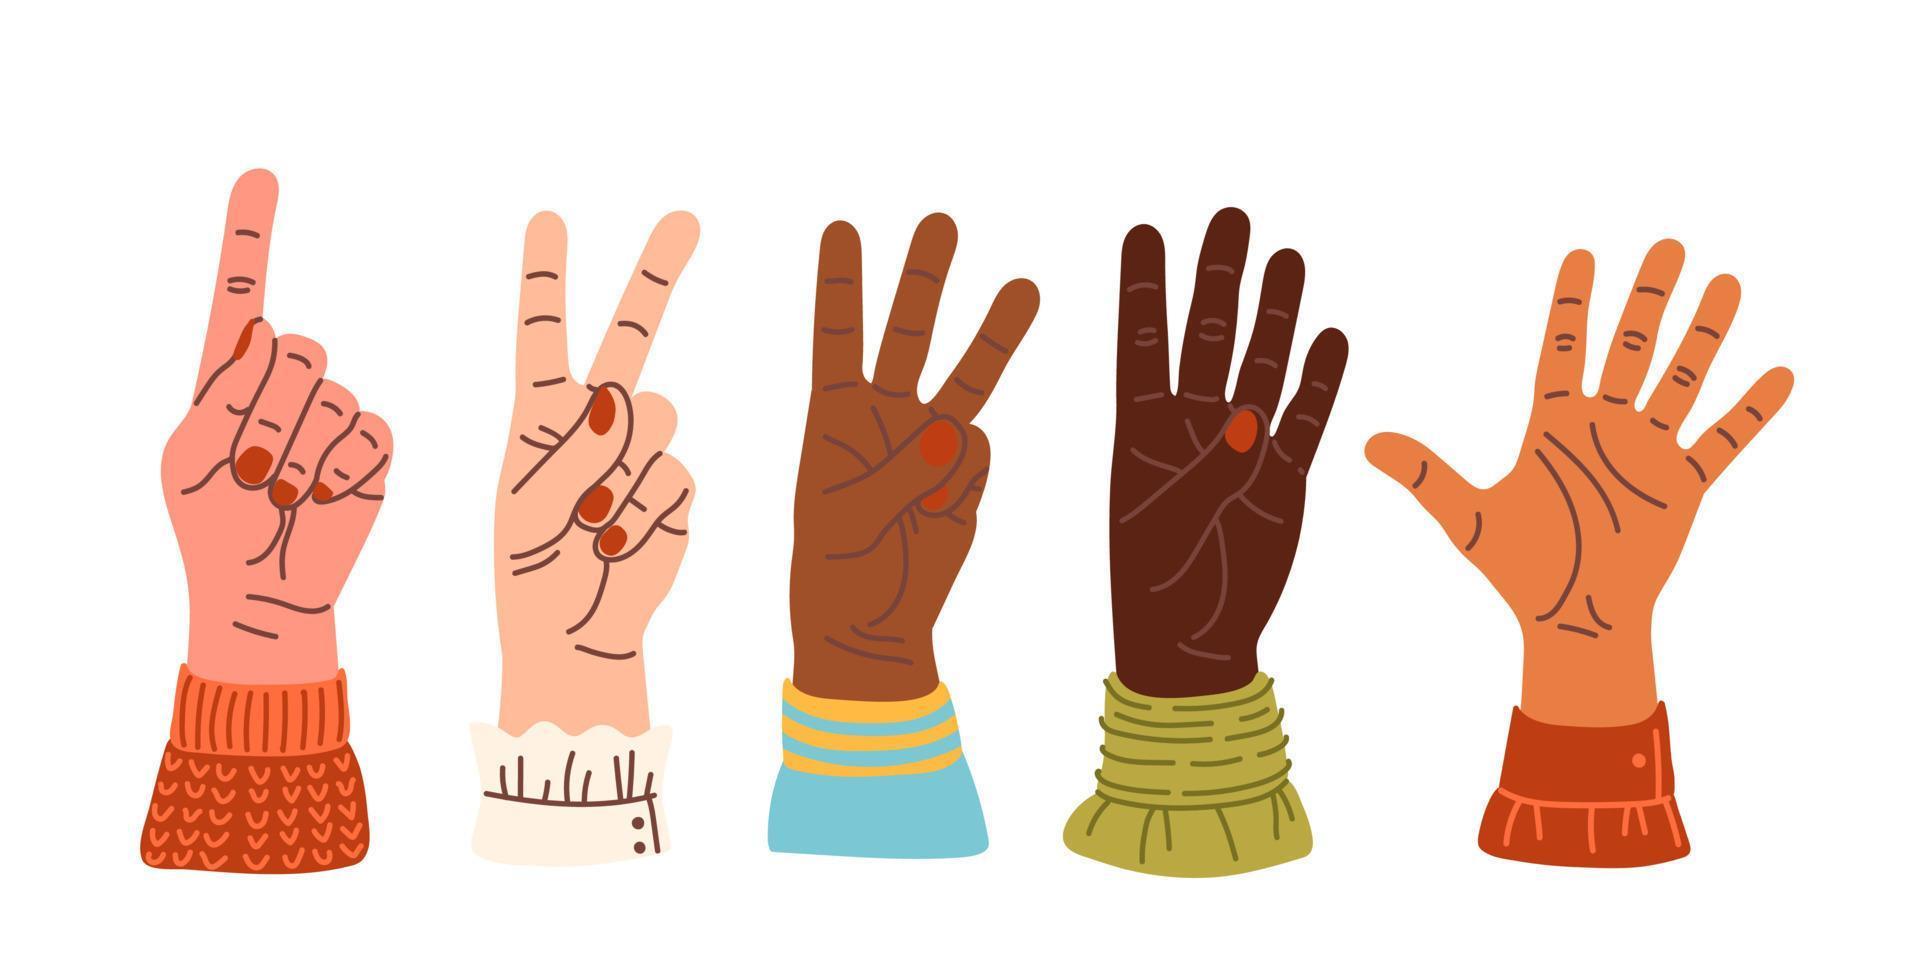 Hands count, counting on the fingers Hand gesture vector illustration isolated. Numbers on the hands. Hand smudge. different nationalities races Diverse society Cartoon style